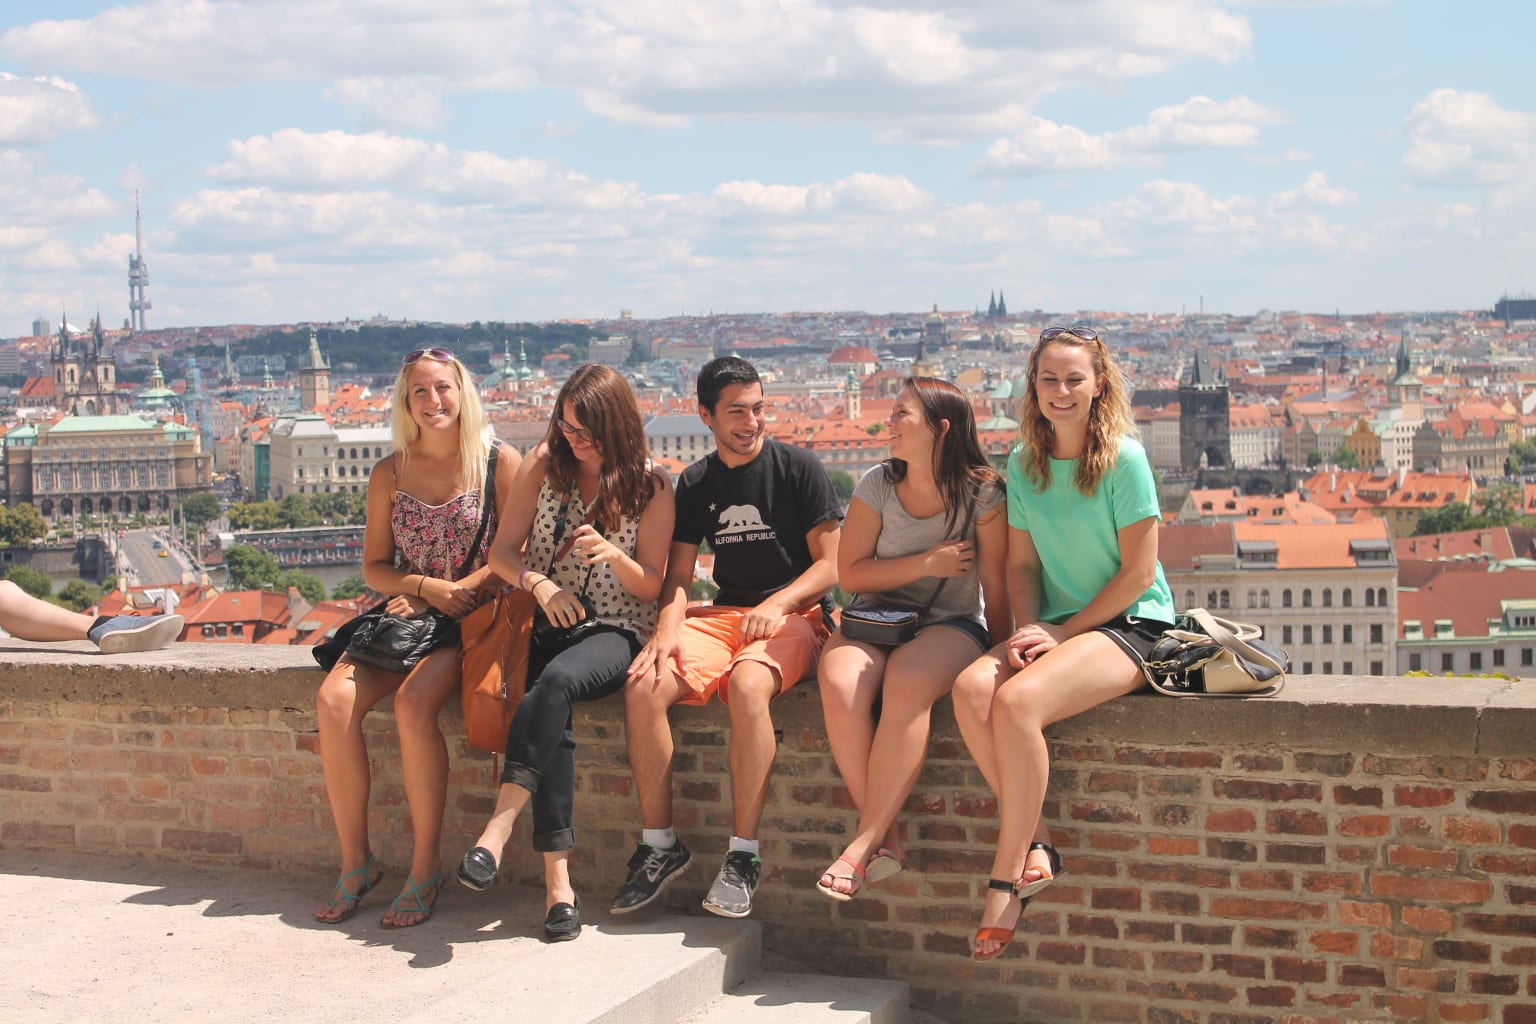 A group of students sitting on a ledge with a view of Prague in the background.